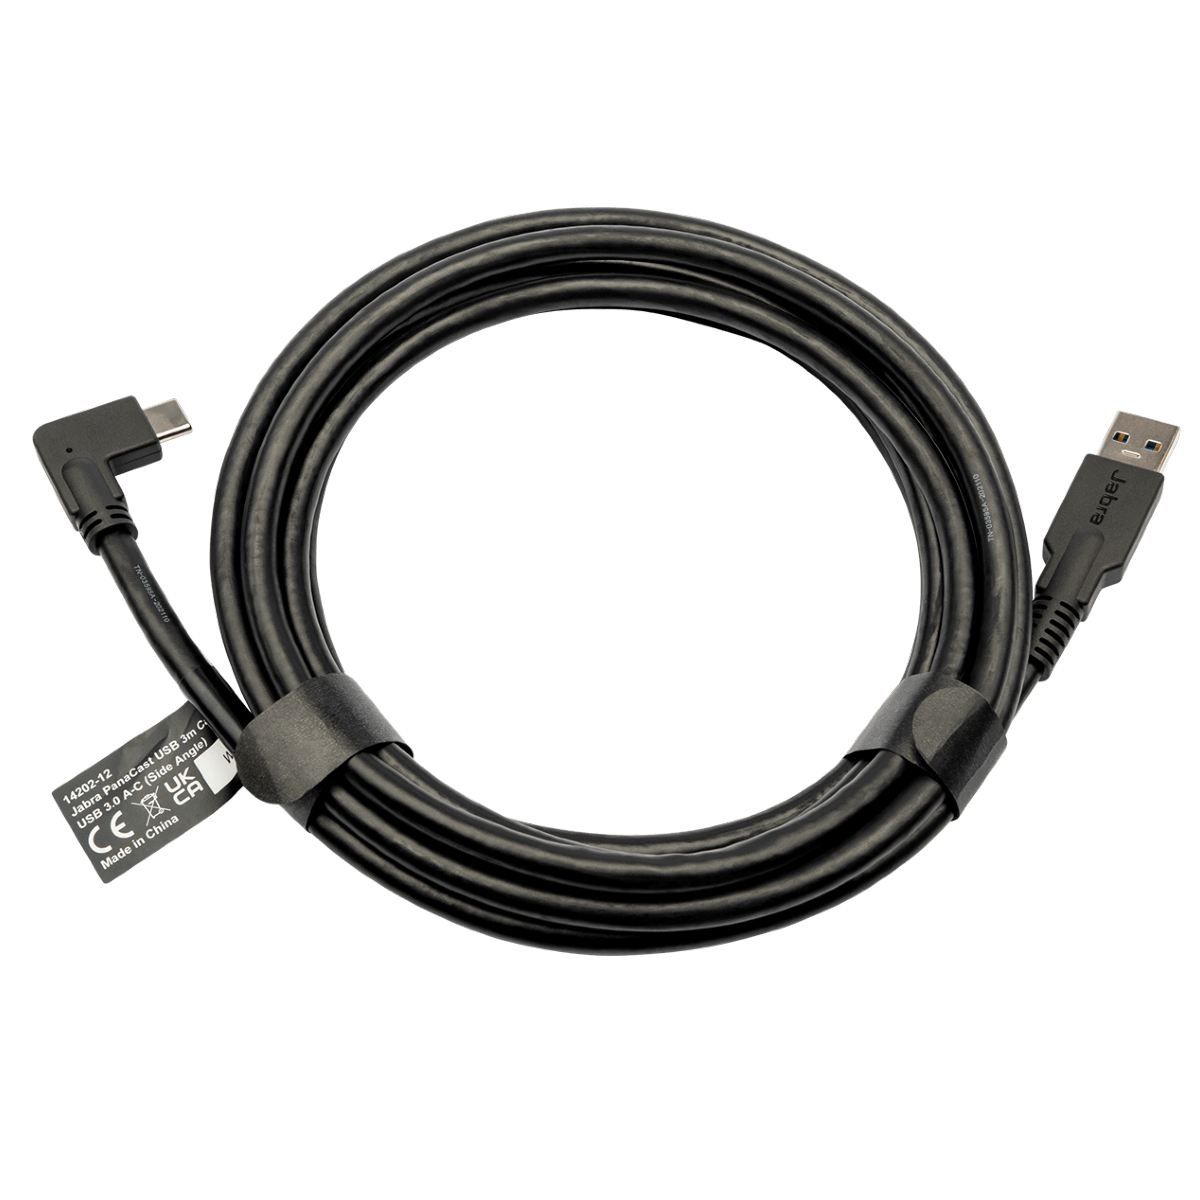 USB A to USB C cable, 3m